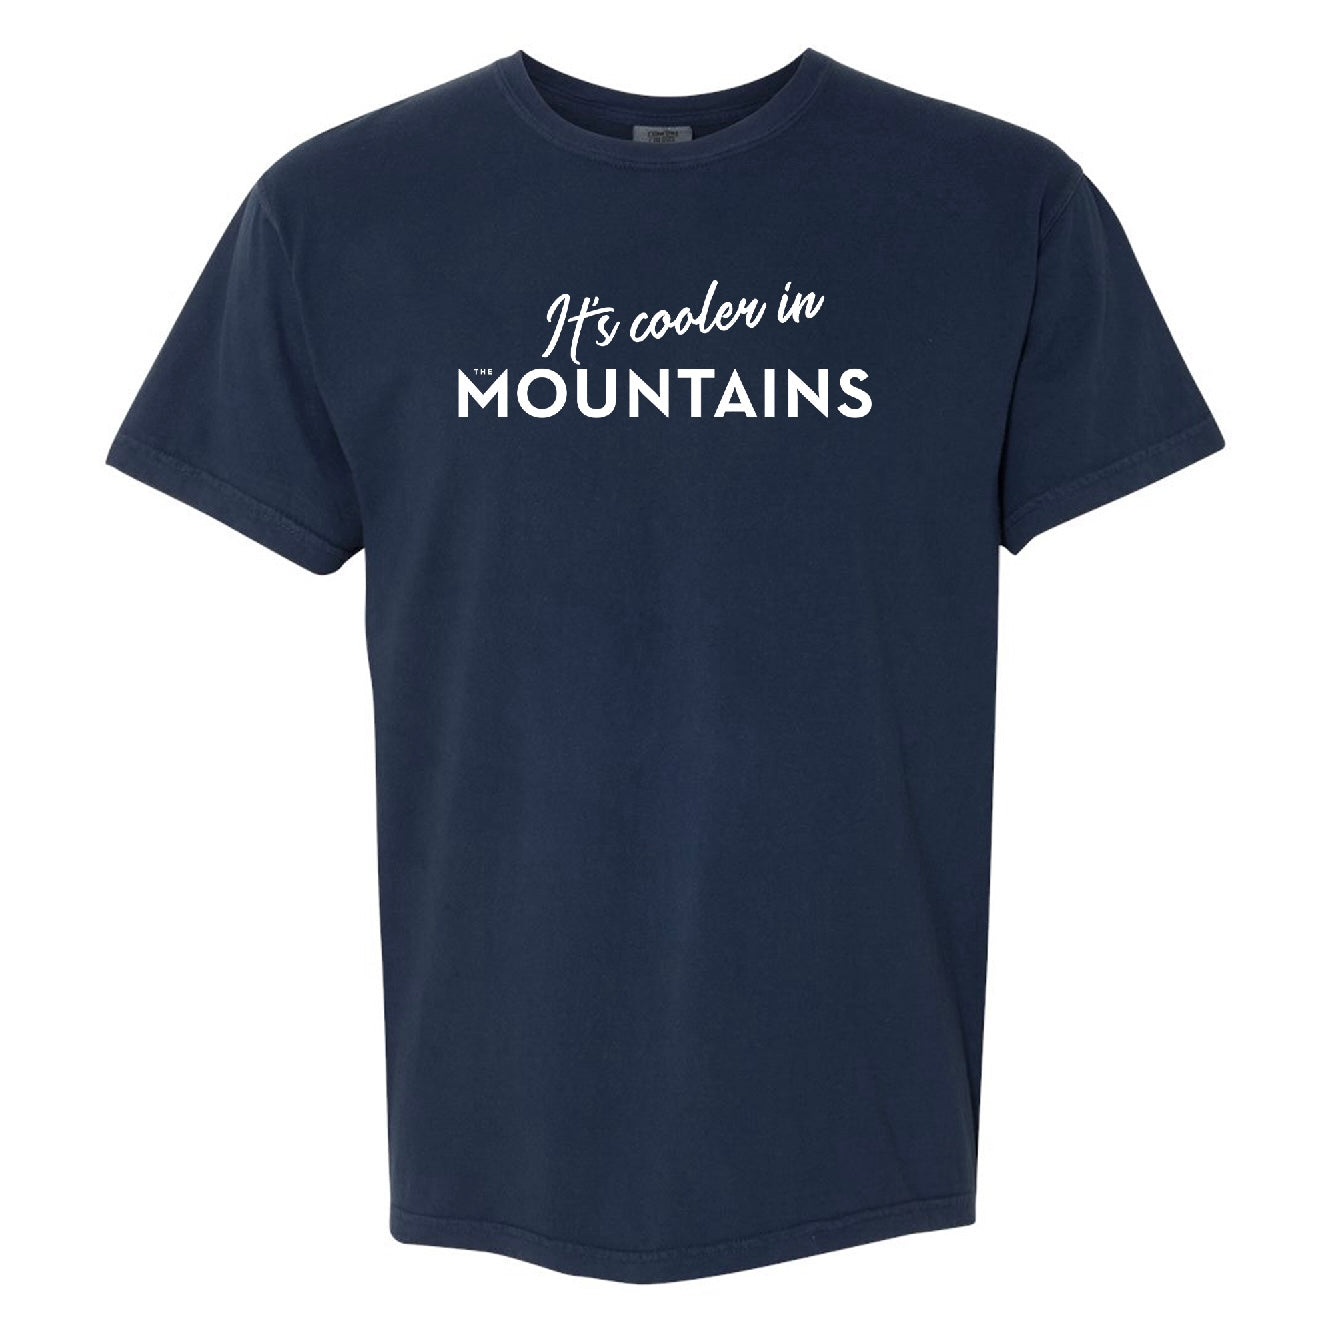 The Mountains T-Shirt